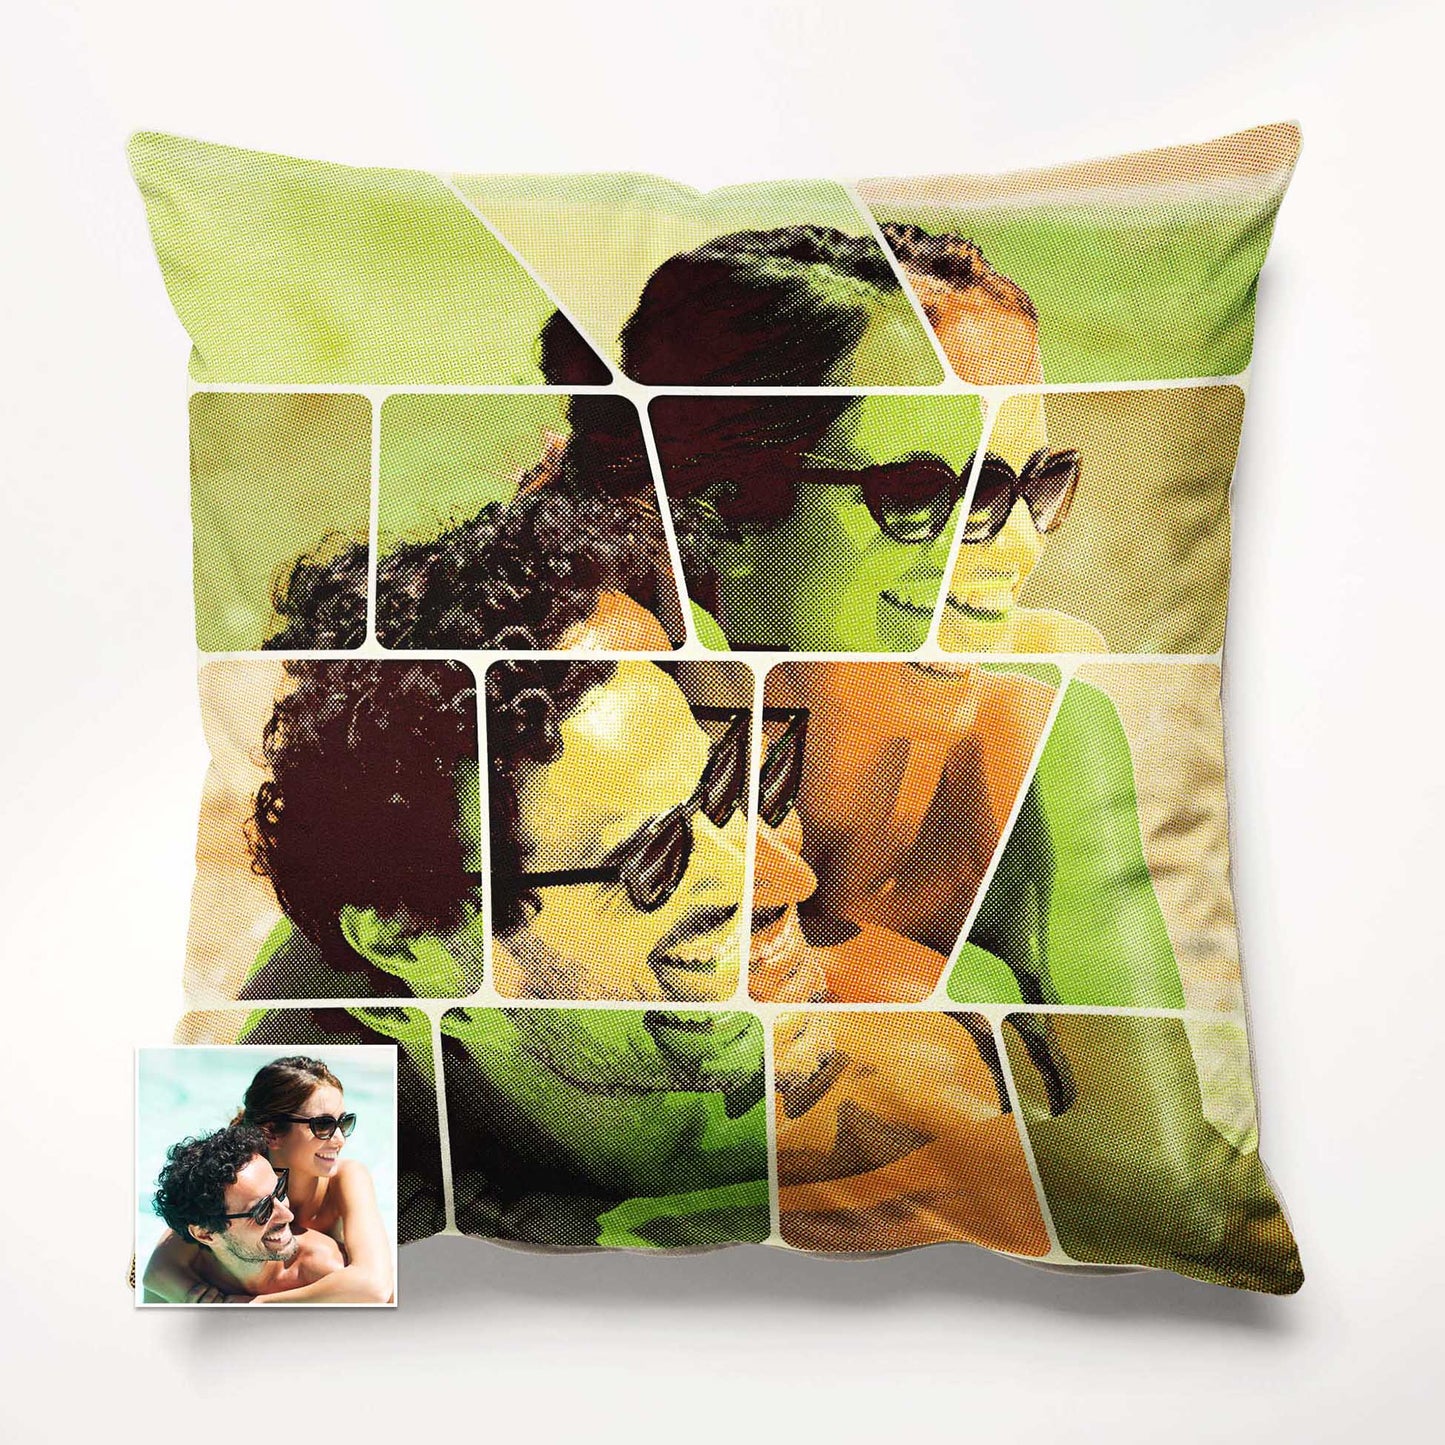 Add a unique and original touch to your home decor with the Personalised Vintage Comics Cushion. The cartoon design created from your photo brings a fresh and cool aesthetic, with vibrant orange and green hues, handmade soft velvet